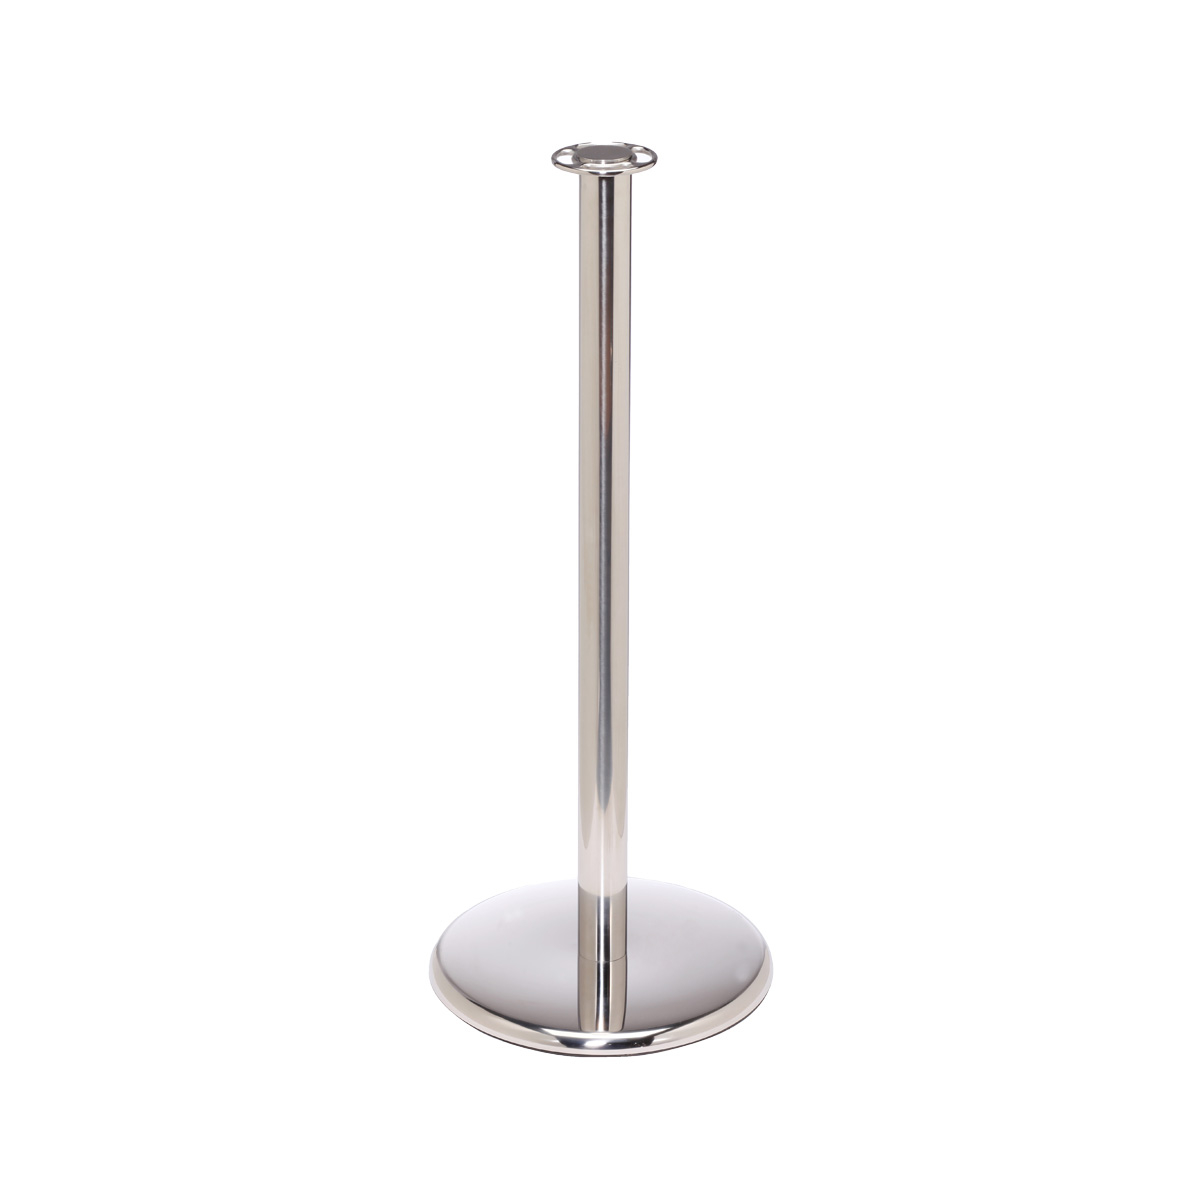 Elegance Pole And Rope Barriers Stainless Steel Stanchion And Flat Top